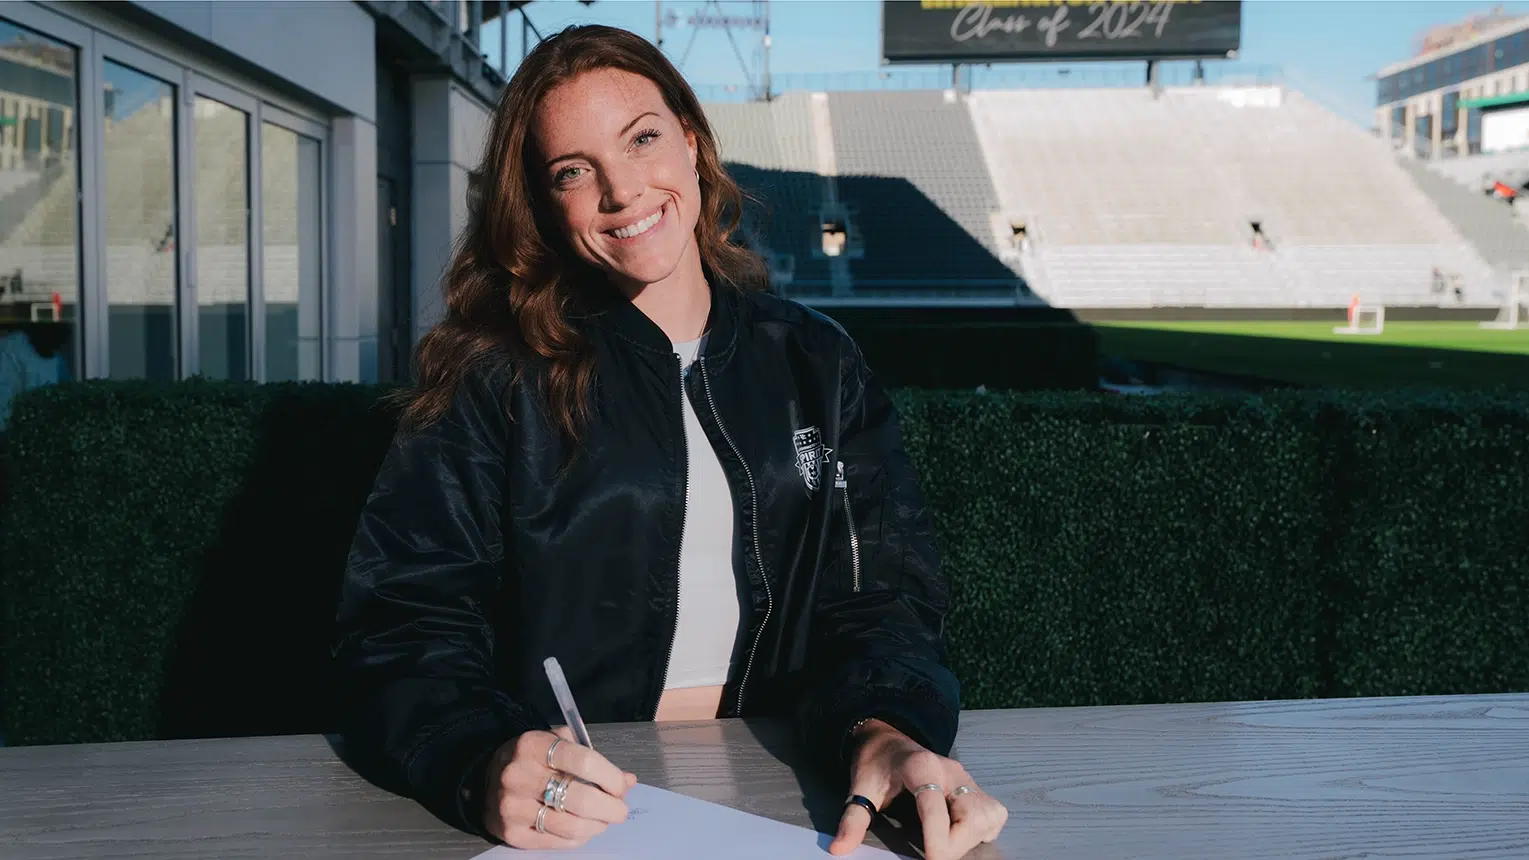 Hal Hershfelt smiles while signing a piece of paper. She's wearing a black satin bomber jacket.